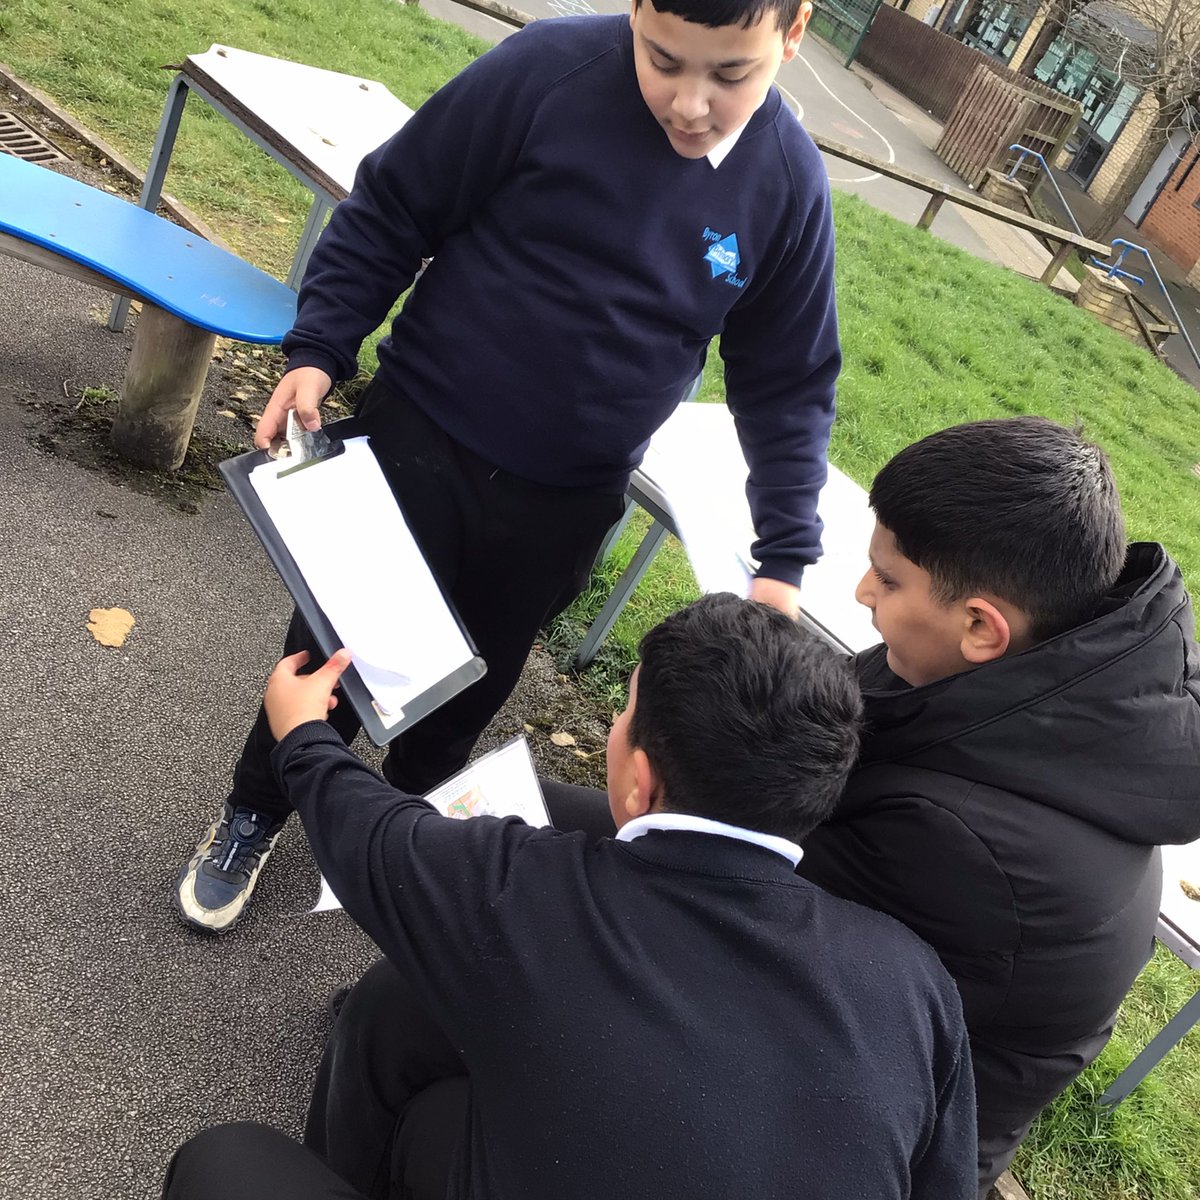 Year 6 had great fun today orienteering as part of their maths lesson. It was excellent to see them working together and being active in their learning! @CCOrienteering #Byronmaths #crosscurricular #orienteering